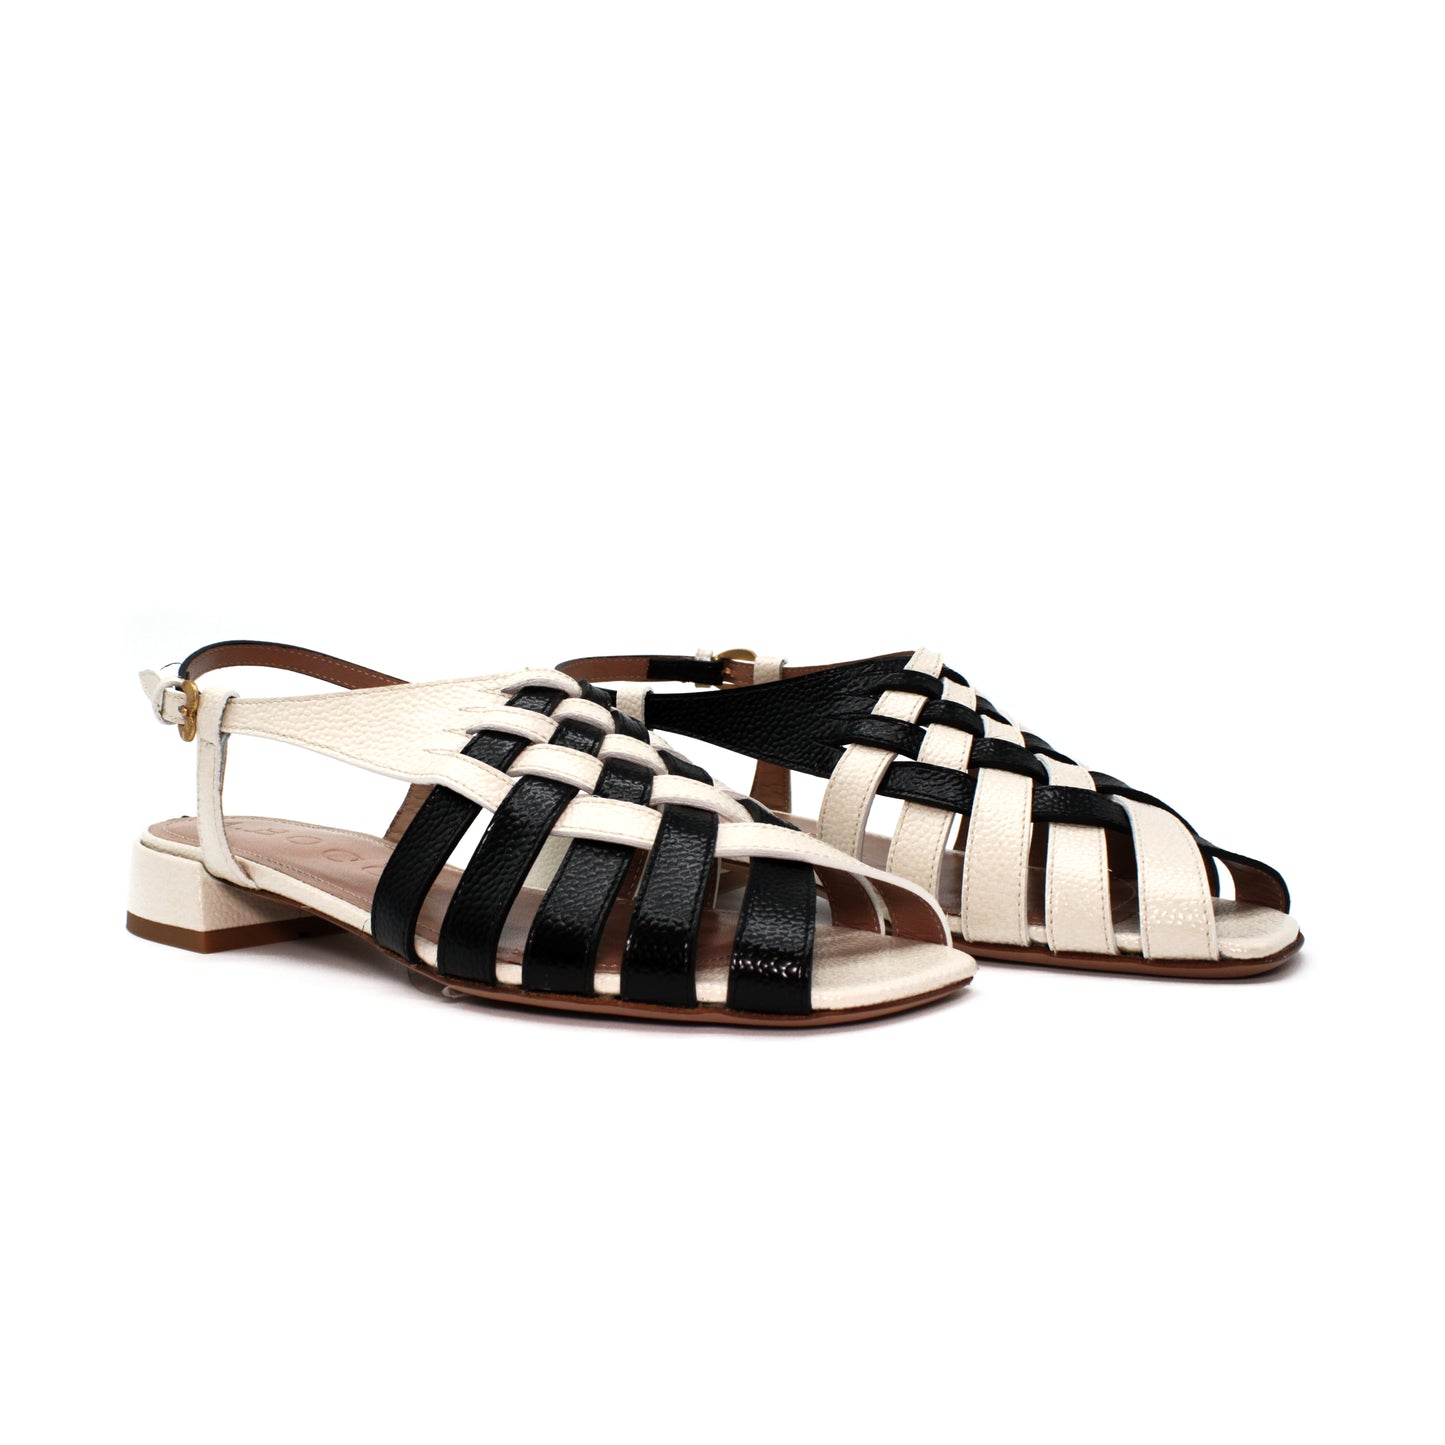 Sandal in two-tone calfskin - Second life